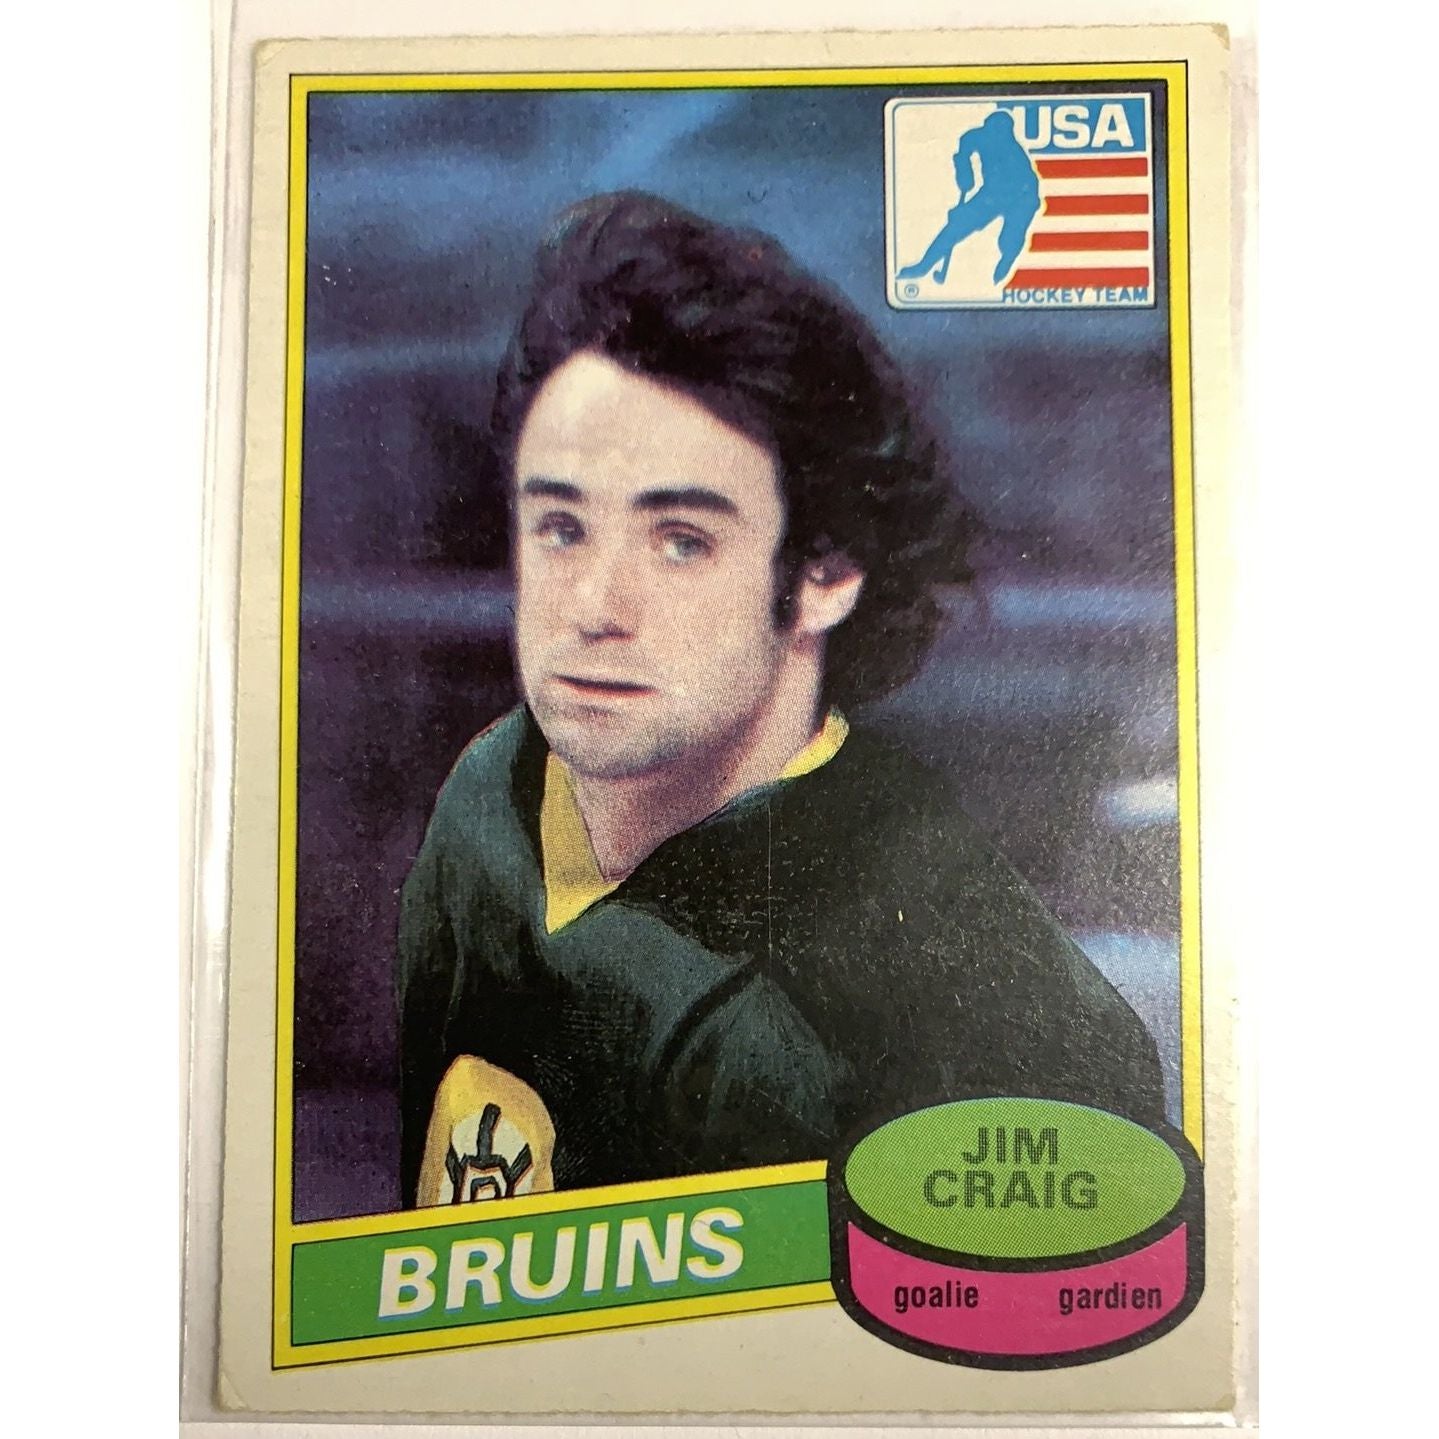  1980-81 O-Pee-Chee Jim Craig Team USA Insert  Local Legends Cards & Collectibles